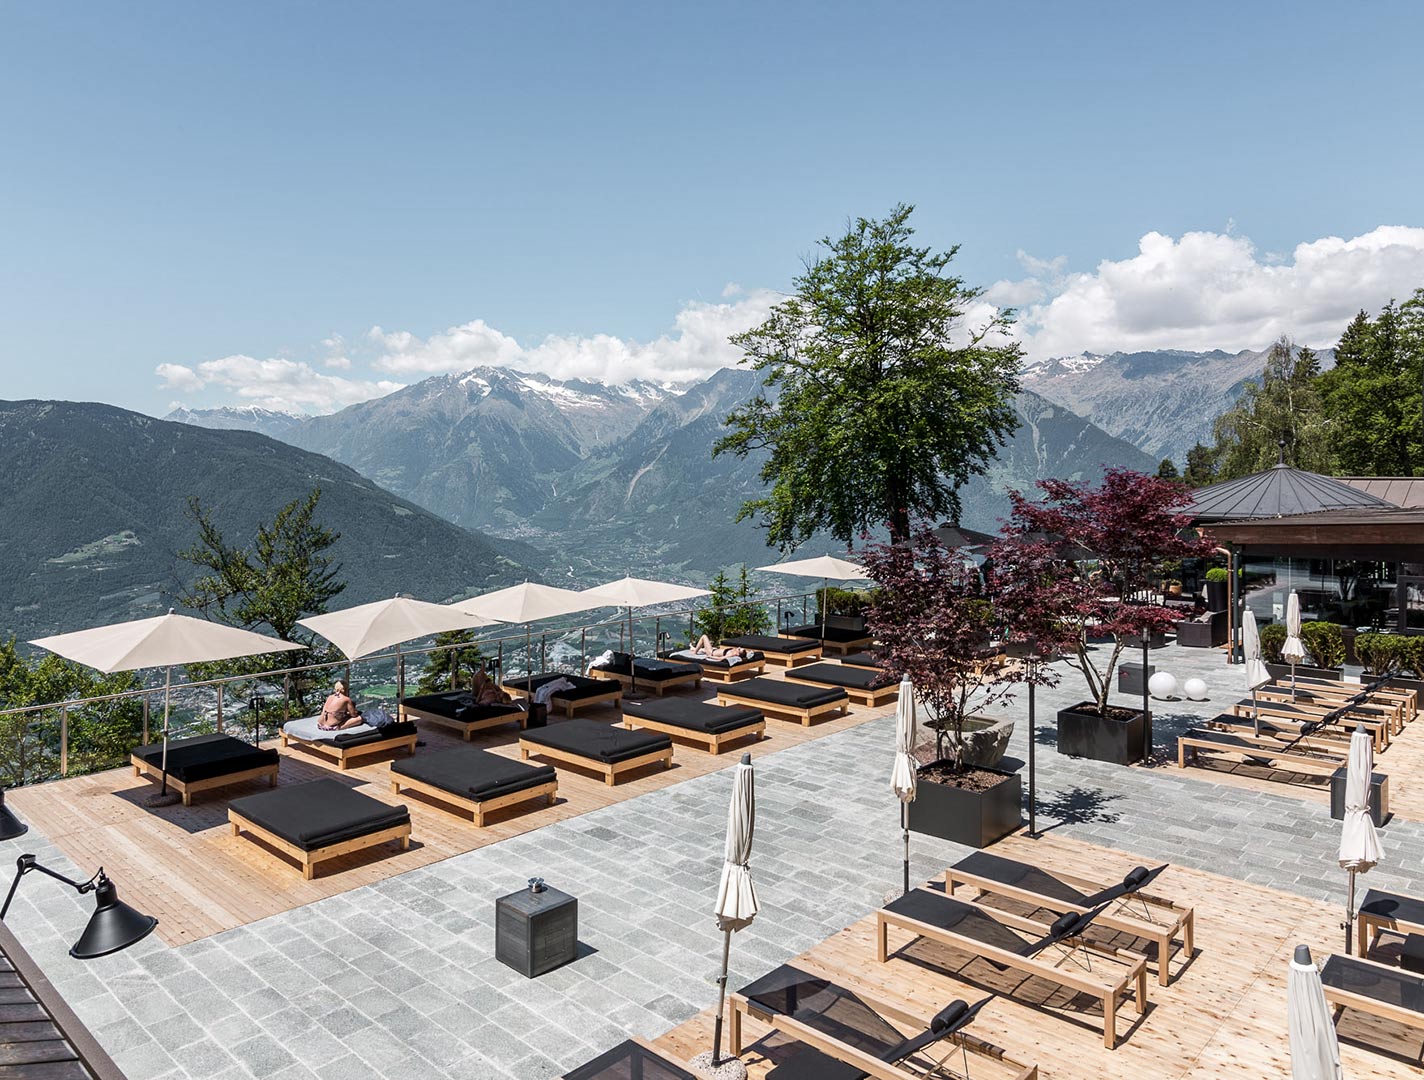 Pretty Hotels: The Perfect Guide to Merano / South Tyrol (Image 12)